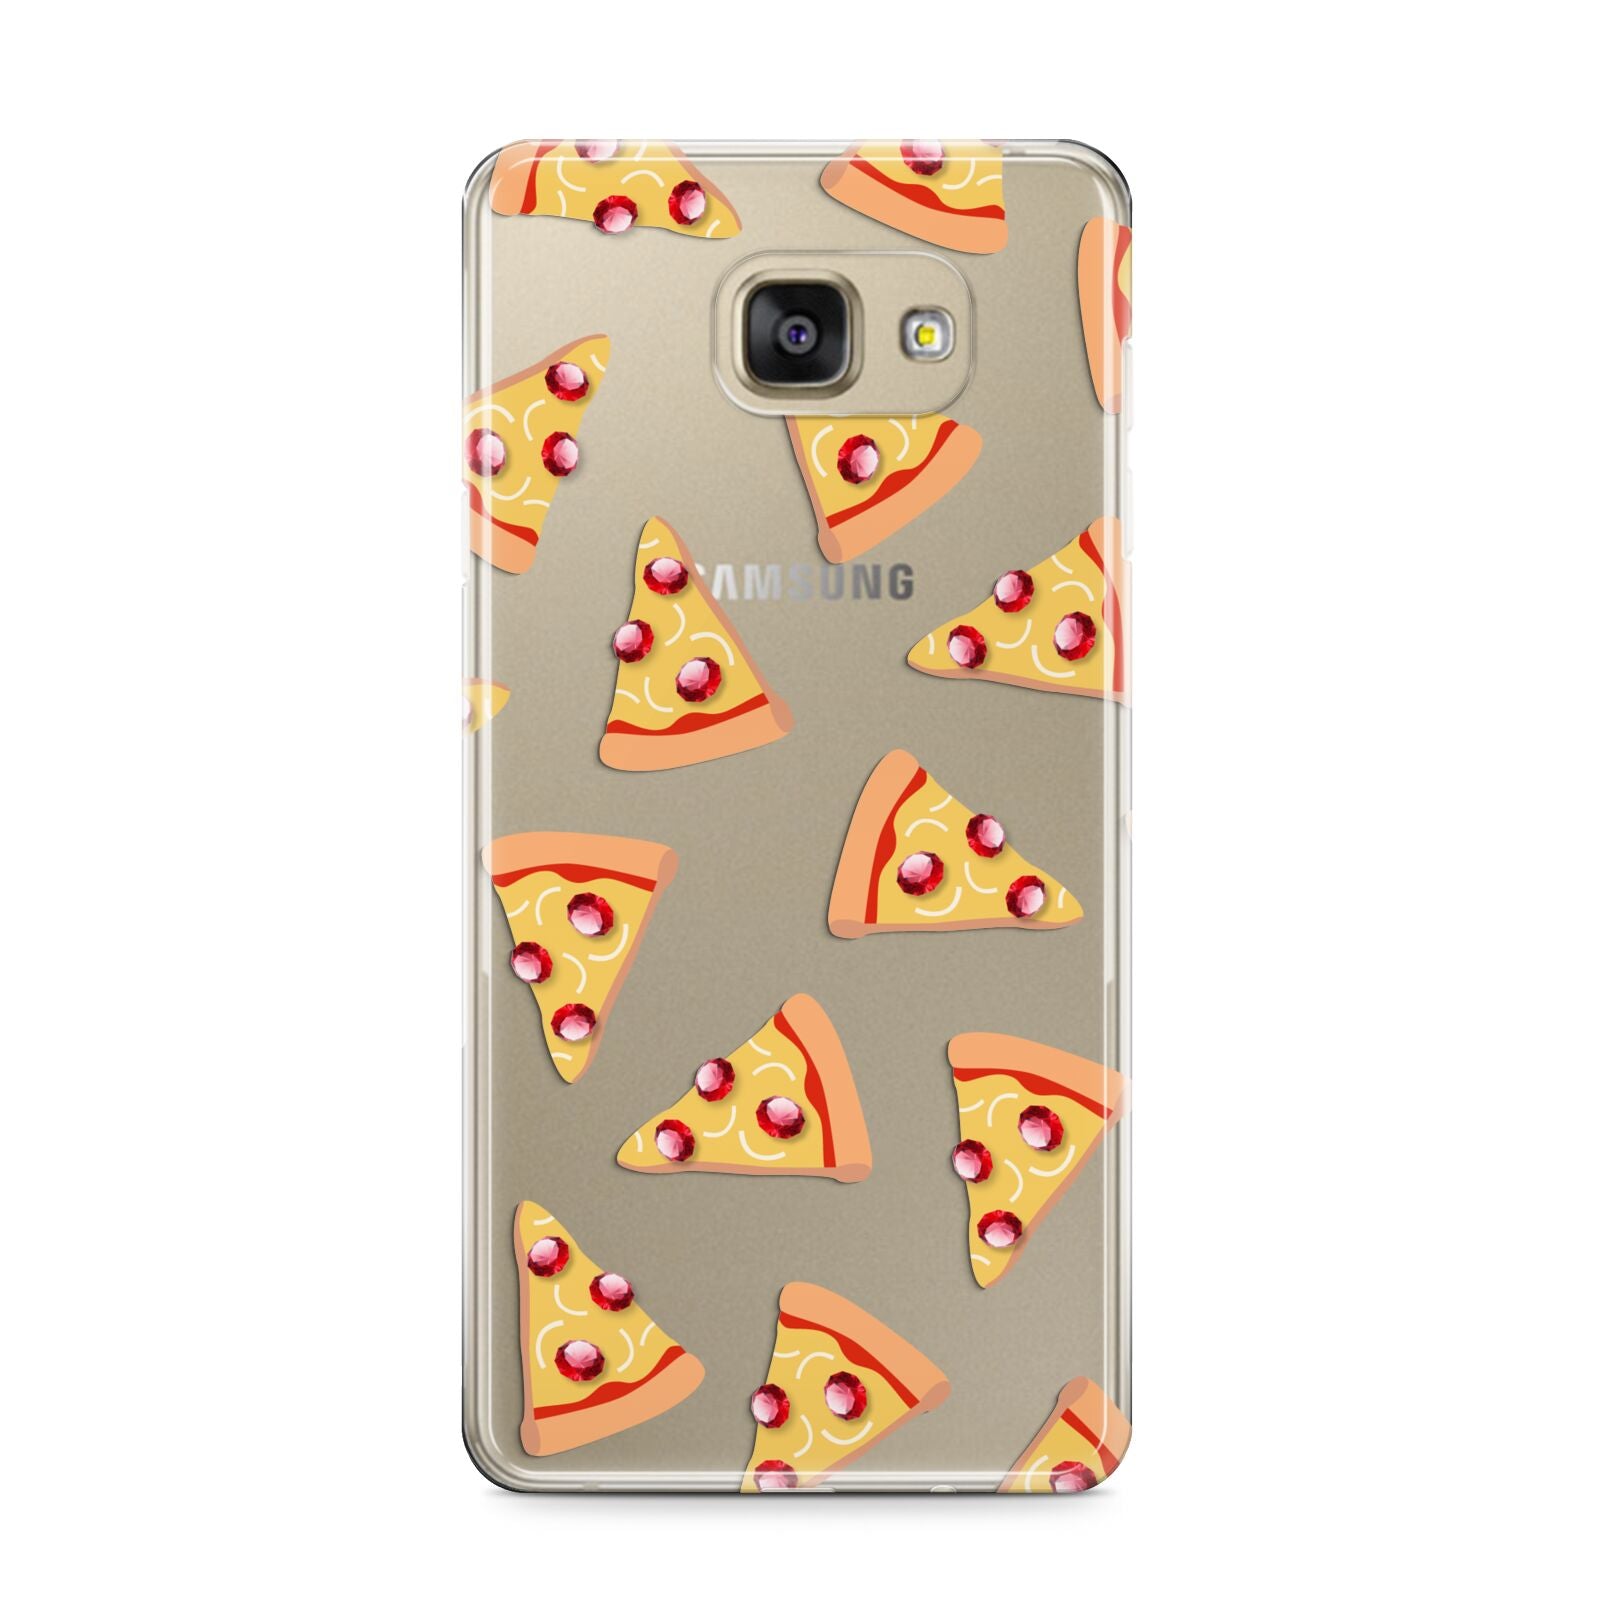 Rubies on Cartoon Pizza Slices Samsung Galaxy A9 2016 Case on gold phone